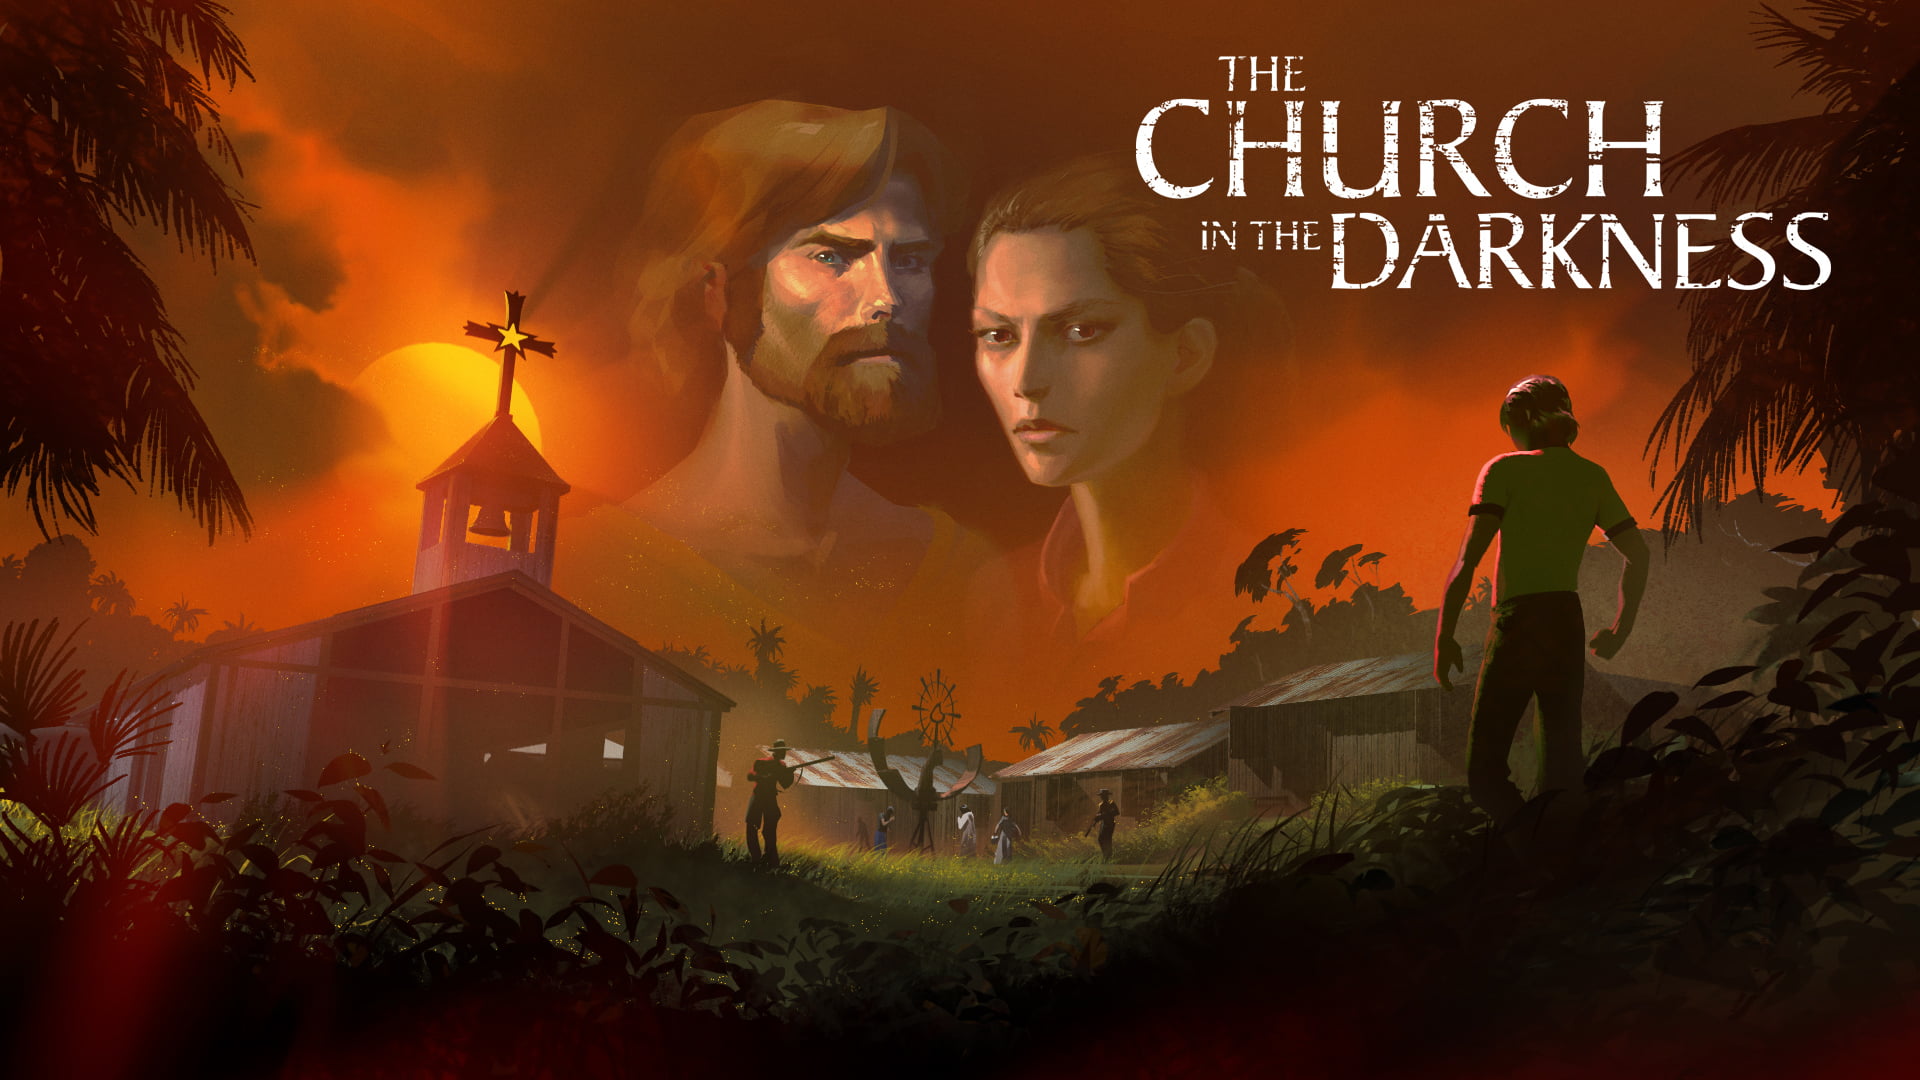 The church in the darkness - review | the church in the darkness | sherlock holmes | the church in the darkness sherlock holmes